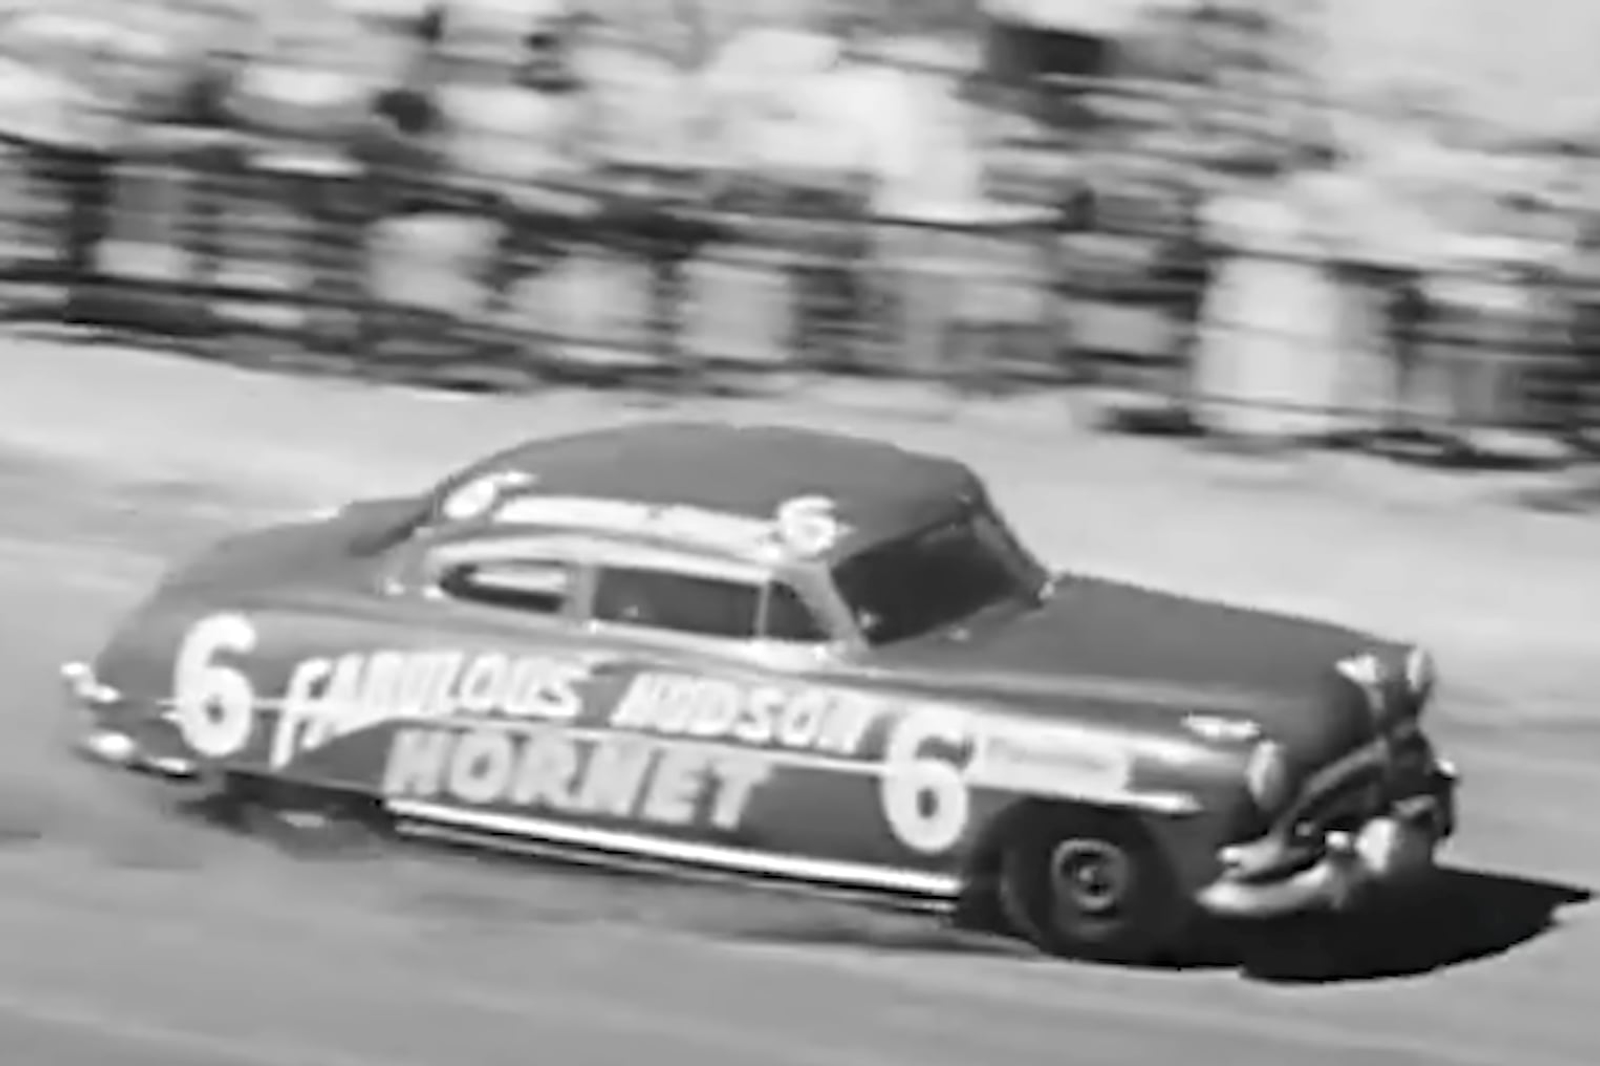 video, motorsport, the story behind the fabulous hudson hornet that inspired doc hudson from cars